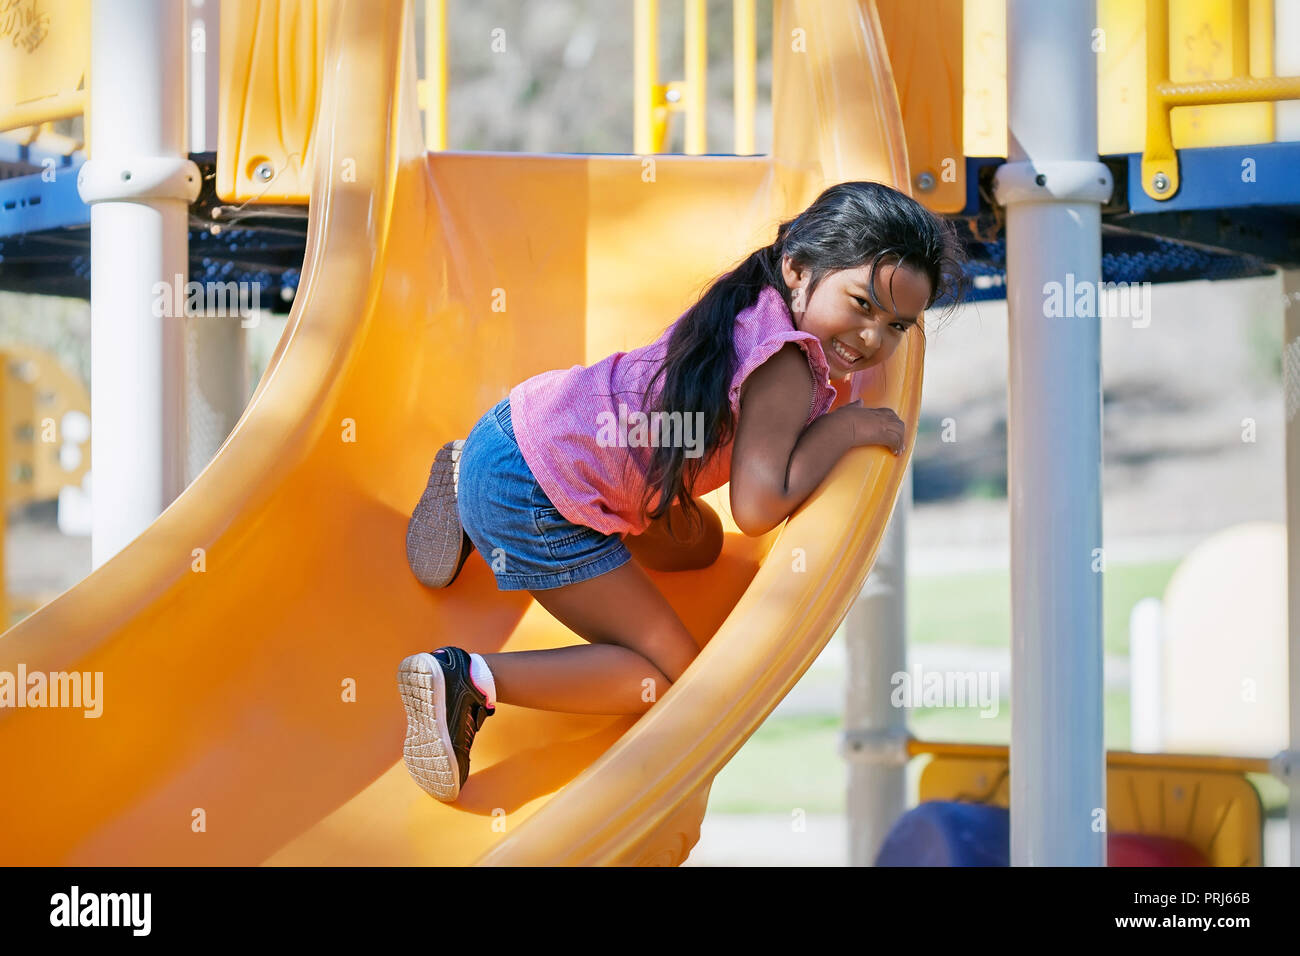 Young girl 5 year old climbing up a slide in a kids playground and enjoying the physical challenge Stock Photo